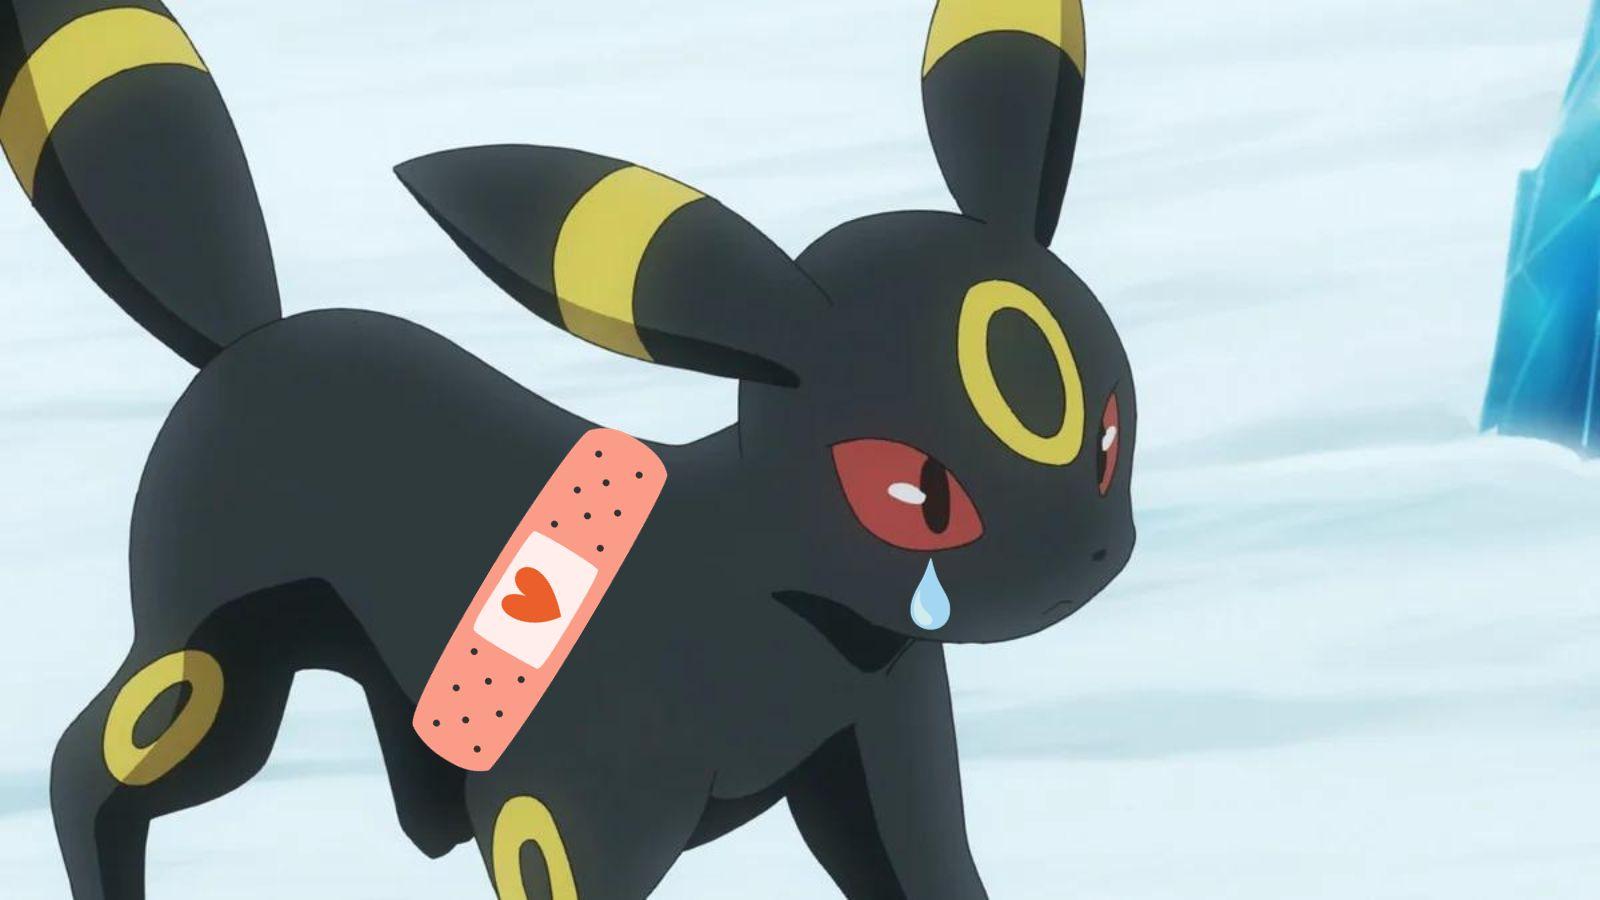 The Pokemon, Umbreon, on the snow with a plaster crying a tear